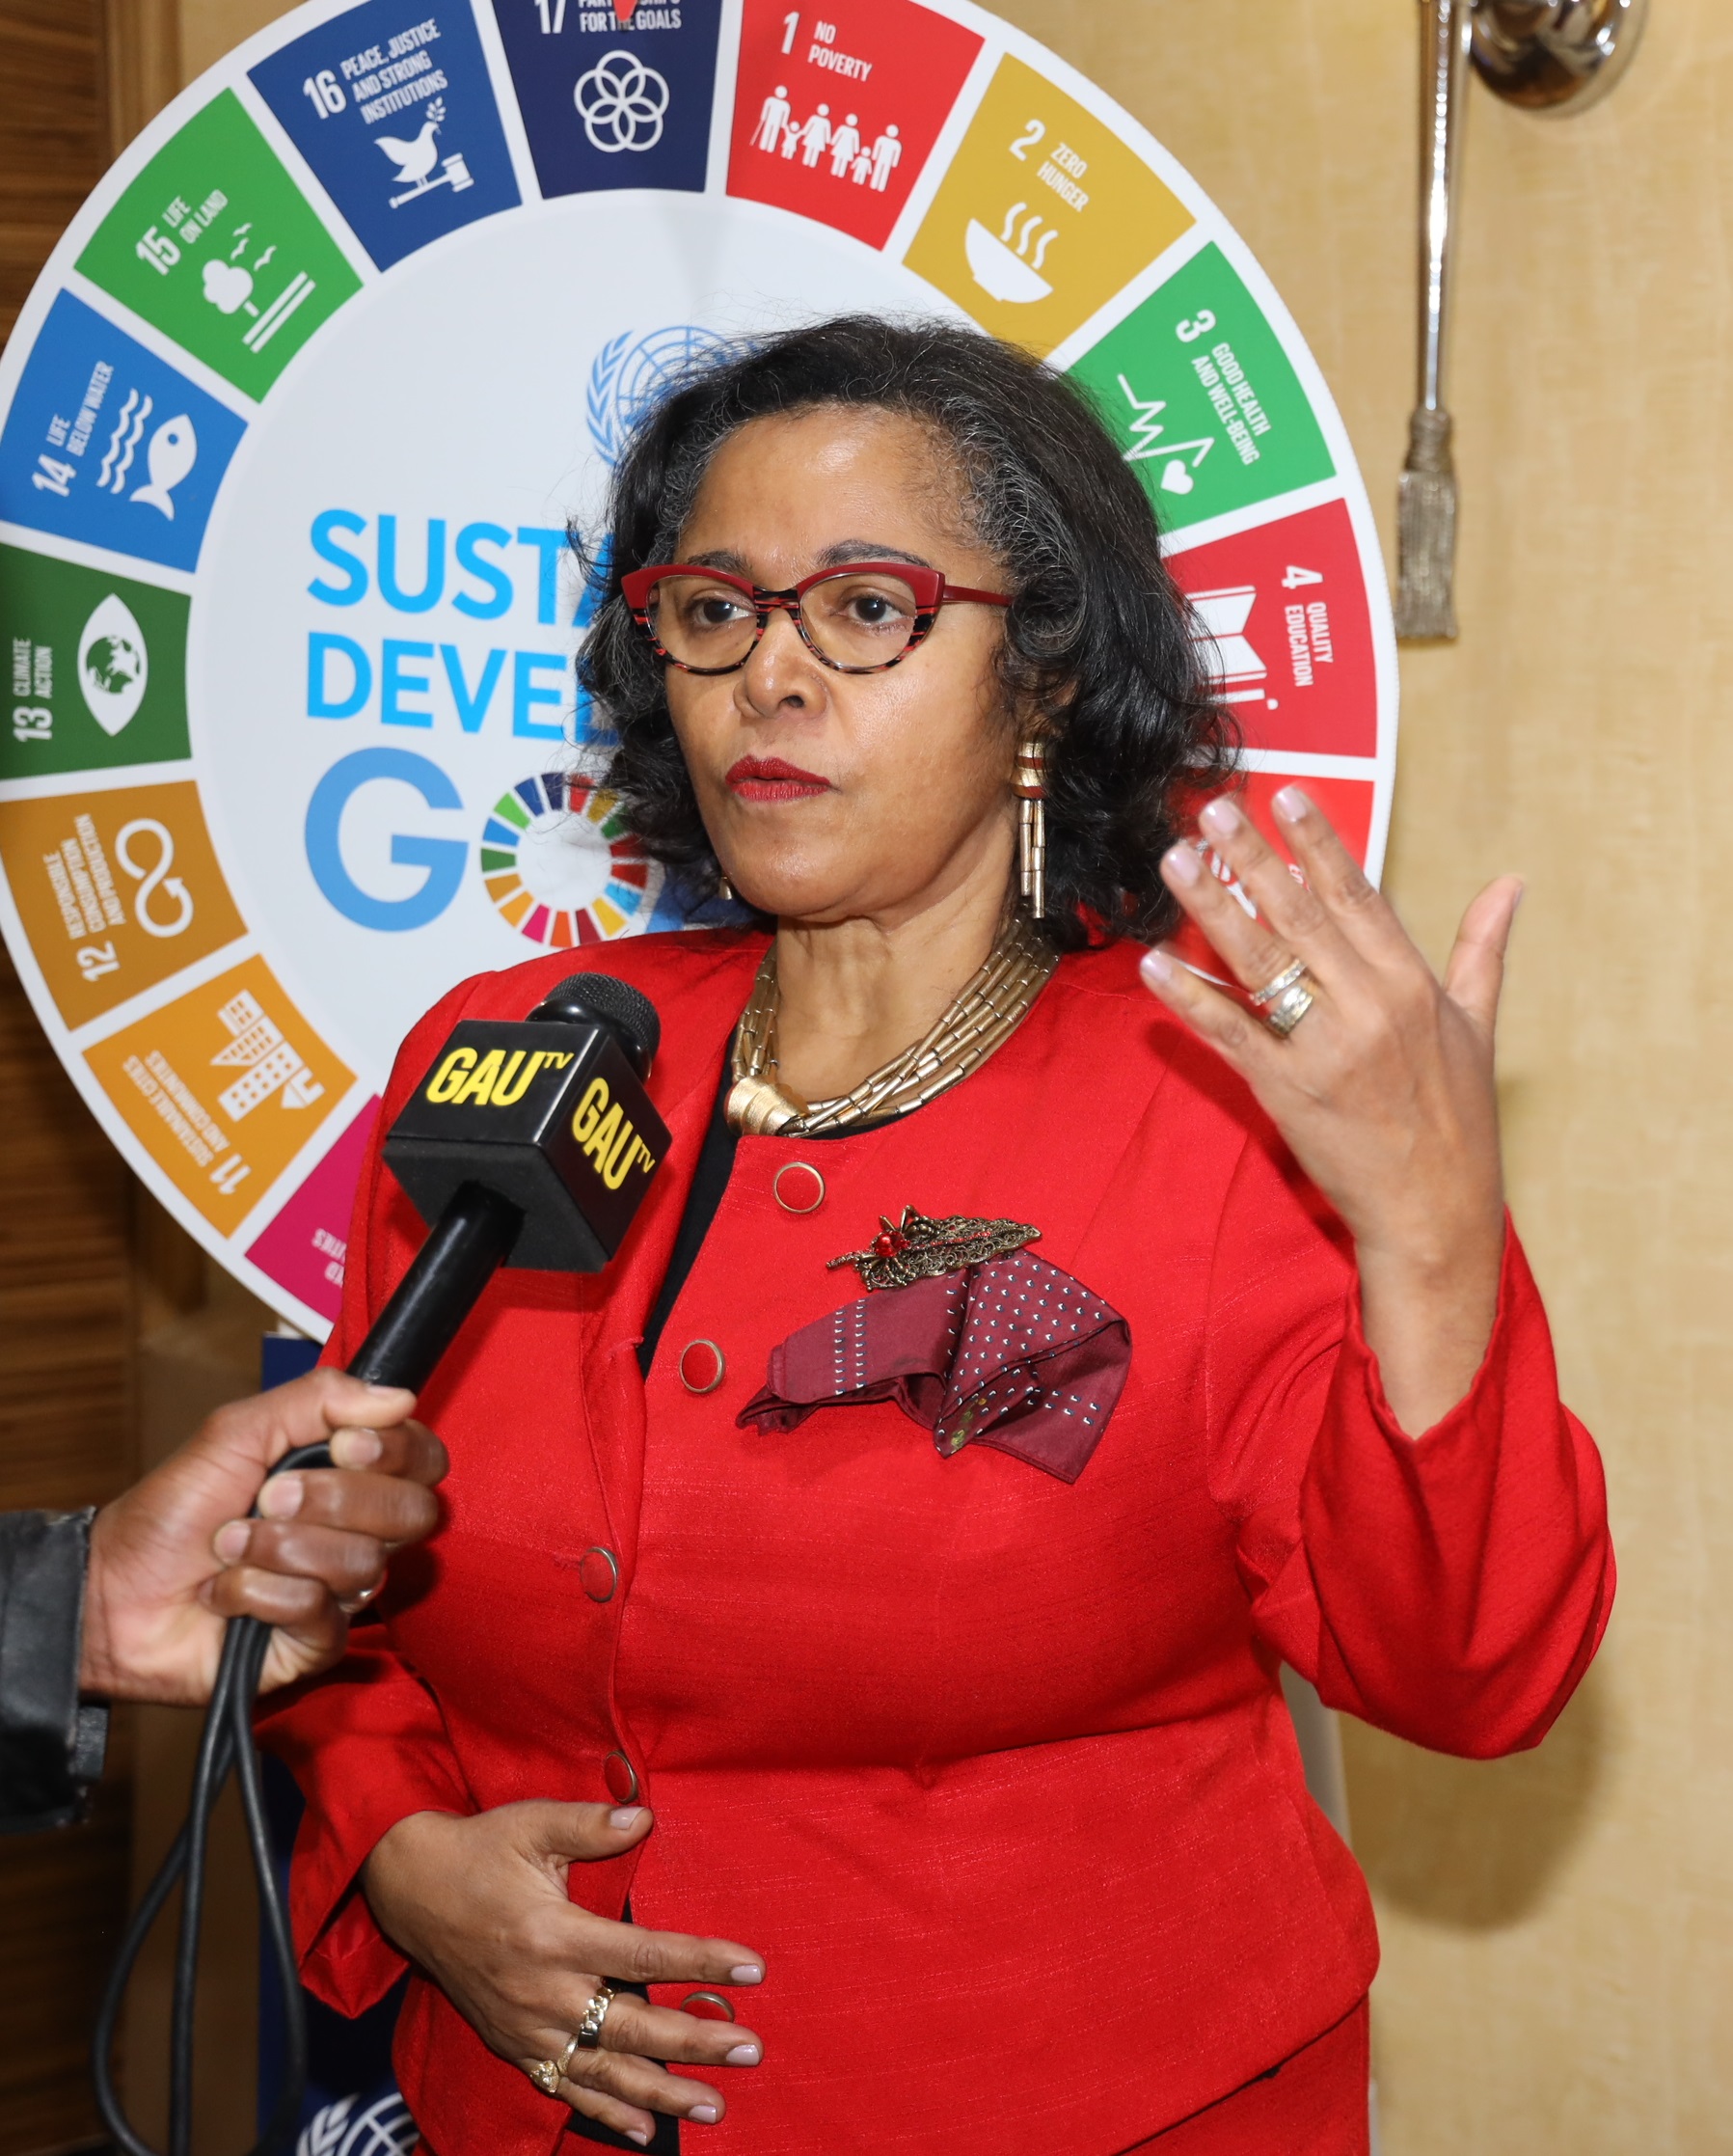 UN-Media engagement to promote awareness on the SDGs in South Africa